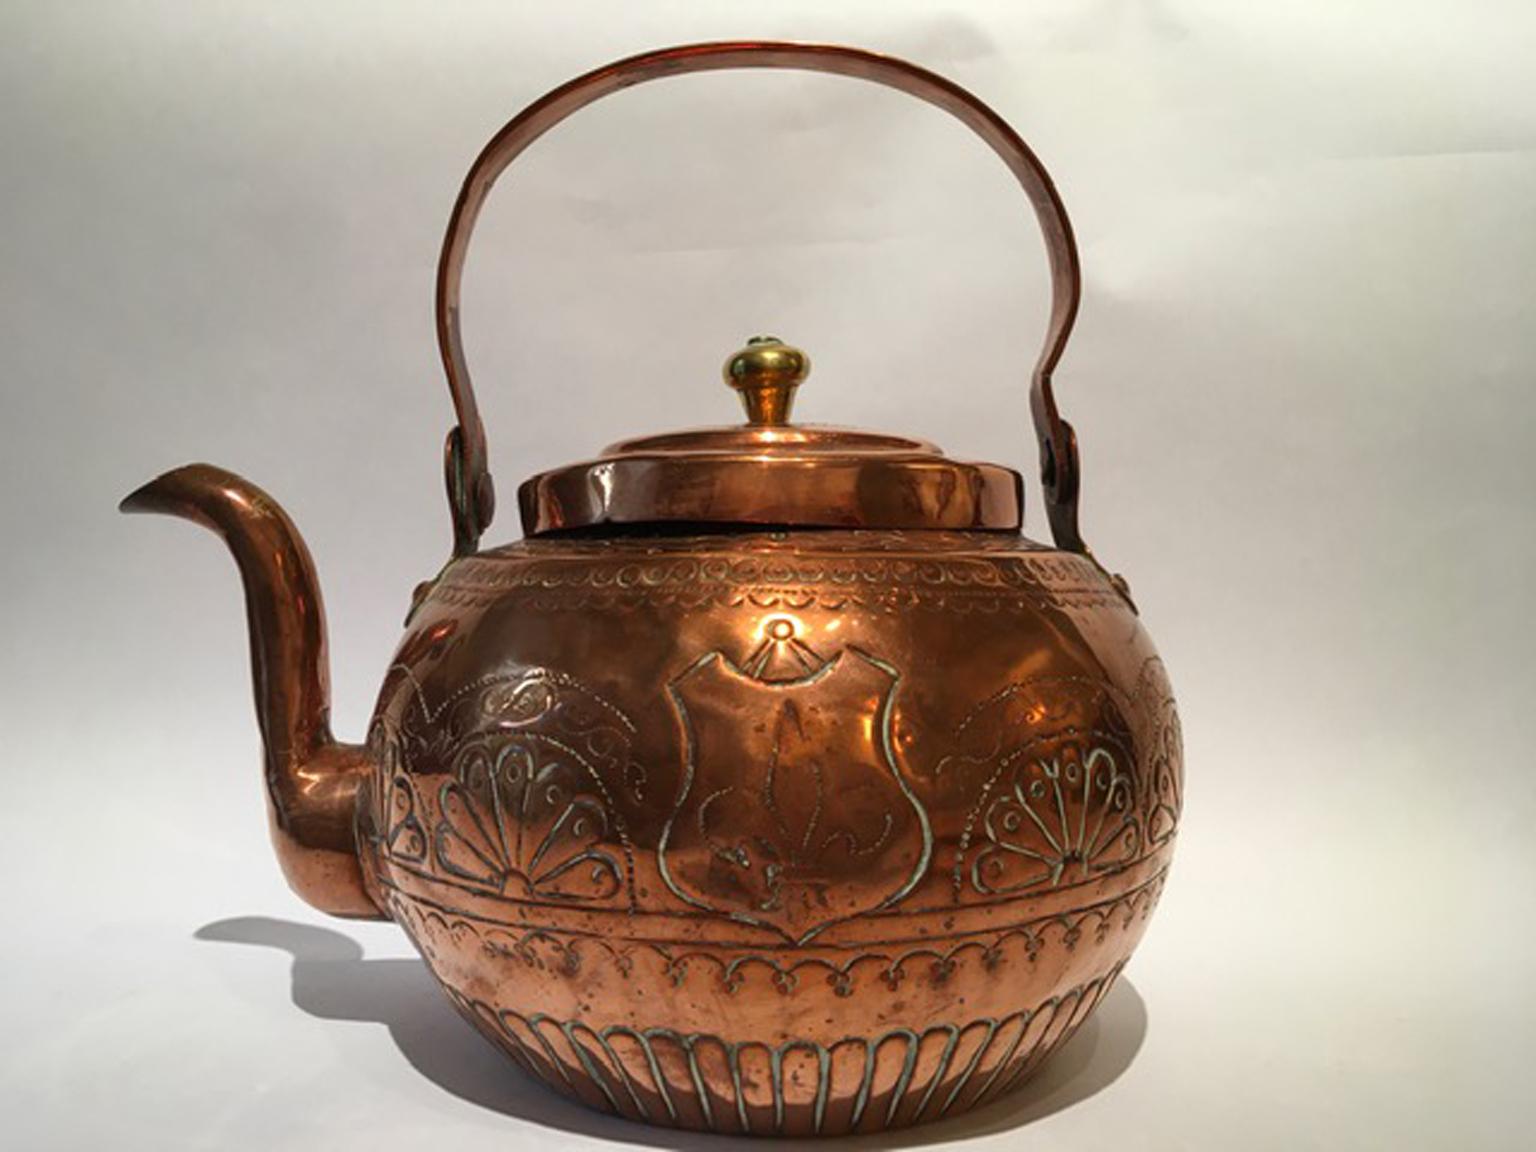 This is an original artcrafted piece made in Florence Tuscany, Italy in the circa 1890. There is the Florentine lily engraved.
The copper kettle shows all signs of the time, but it don't lose its charm.

The piece shows irregularity and hits but it